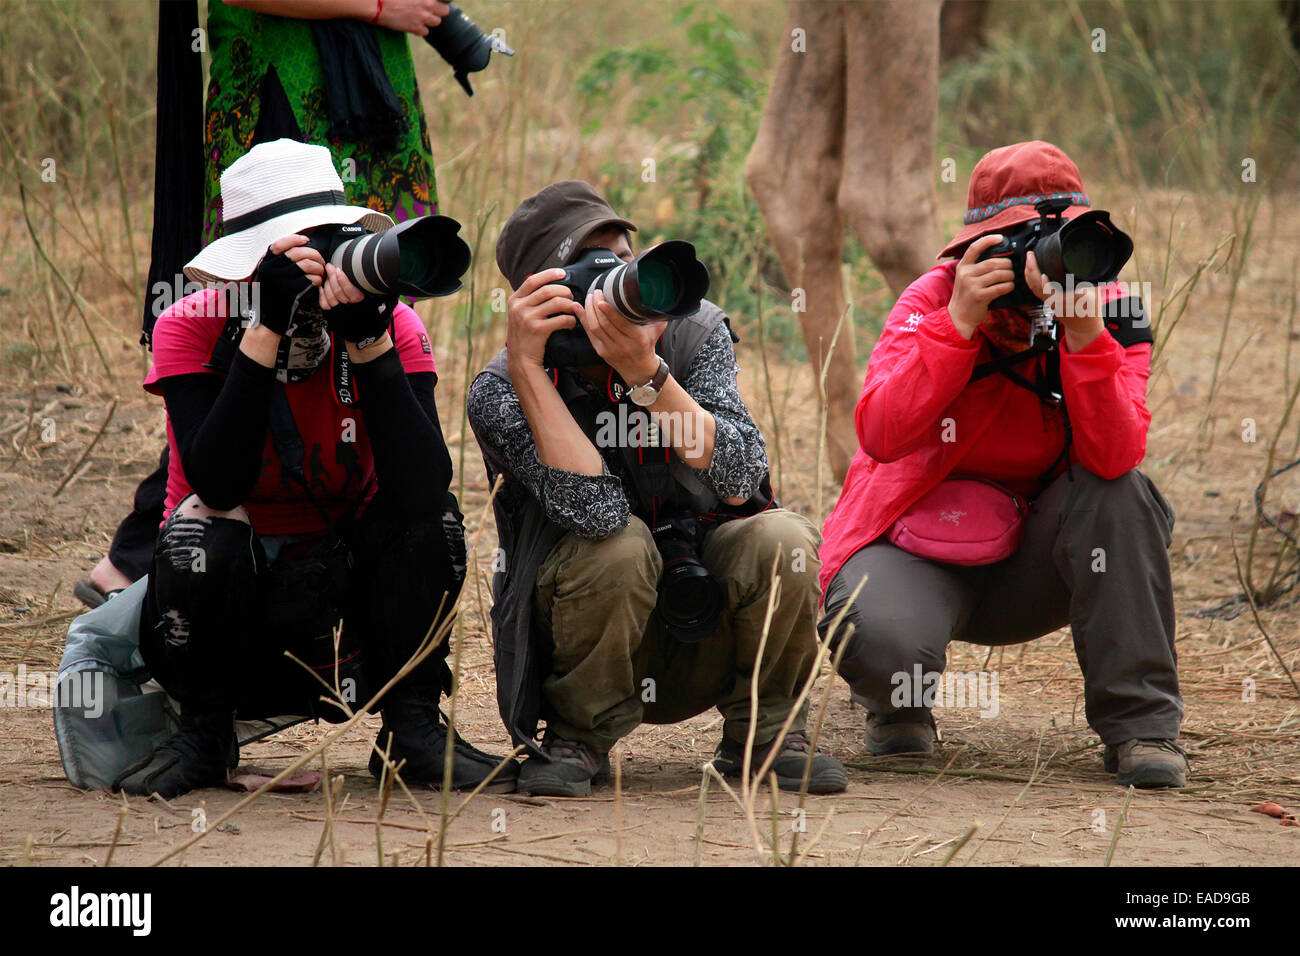 photographer, tourist, male, female, shooting, wearing good clothes in pushkar rajasthan, India. Stock Photo